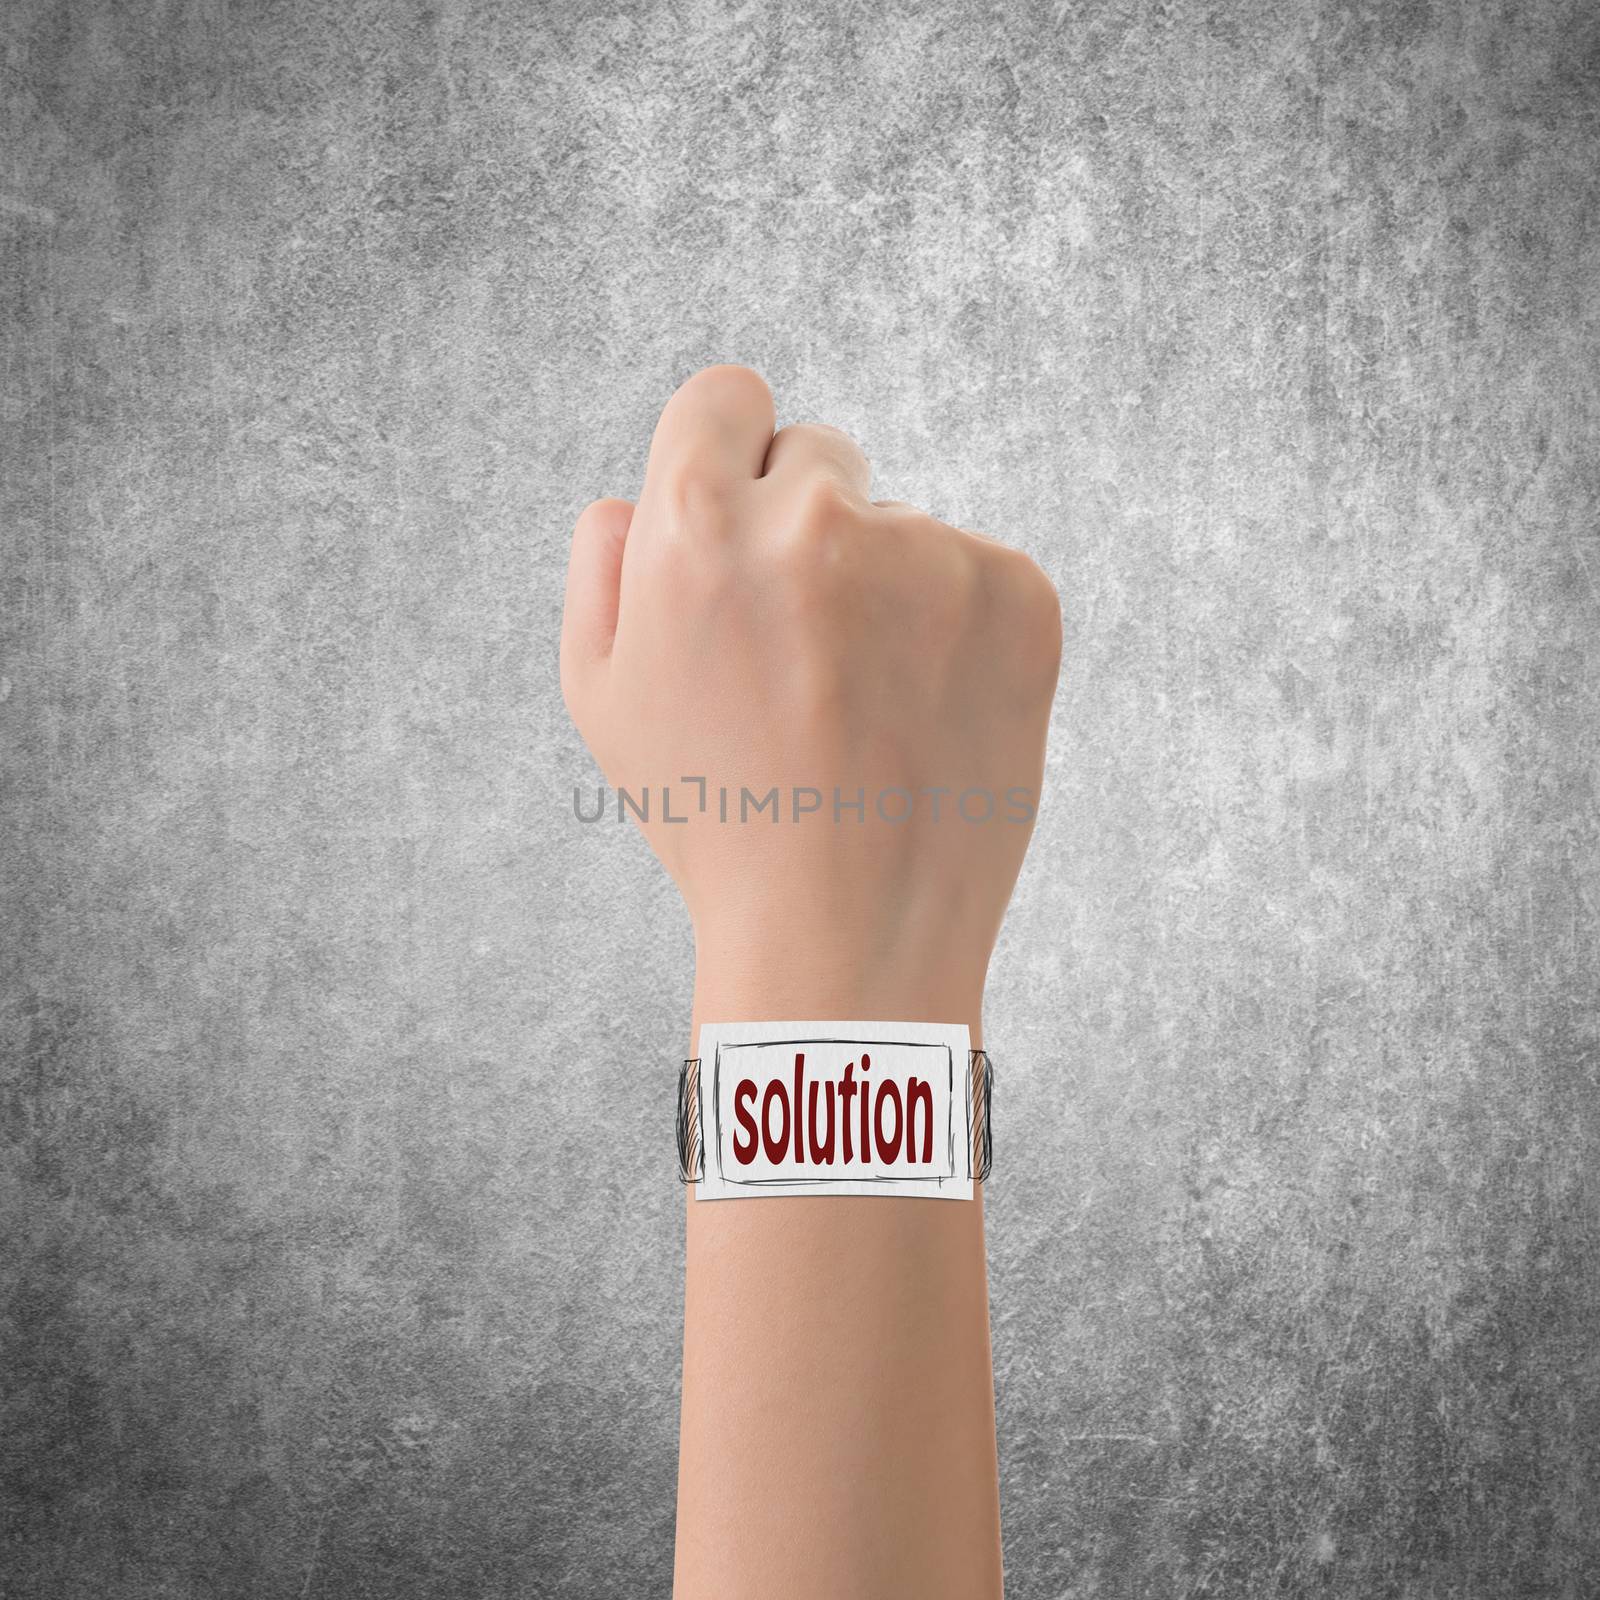 Smart watch concept of solution.